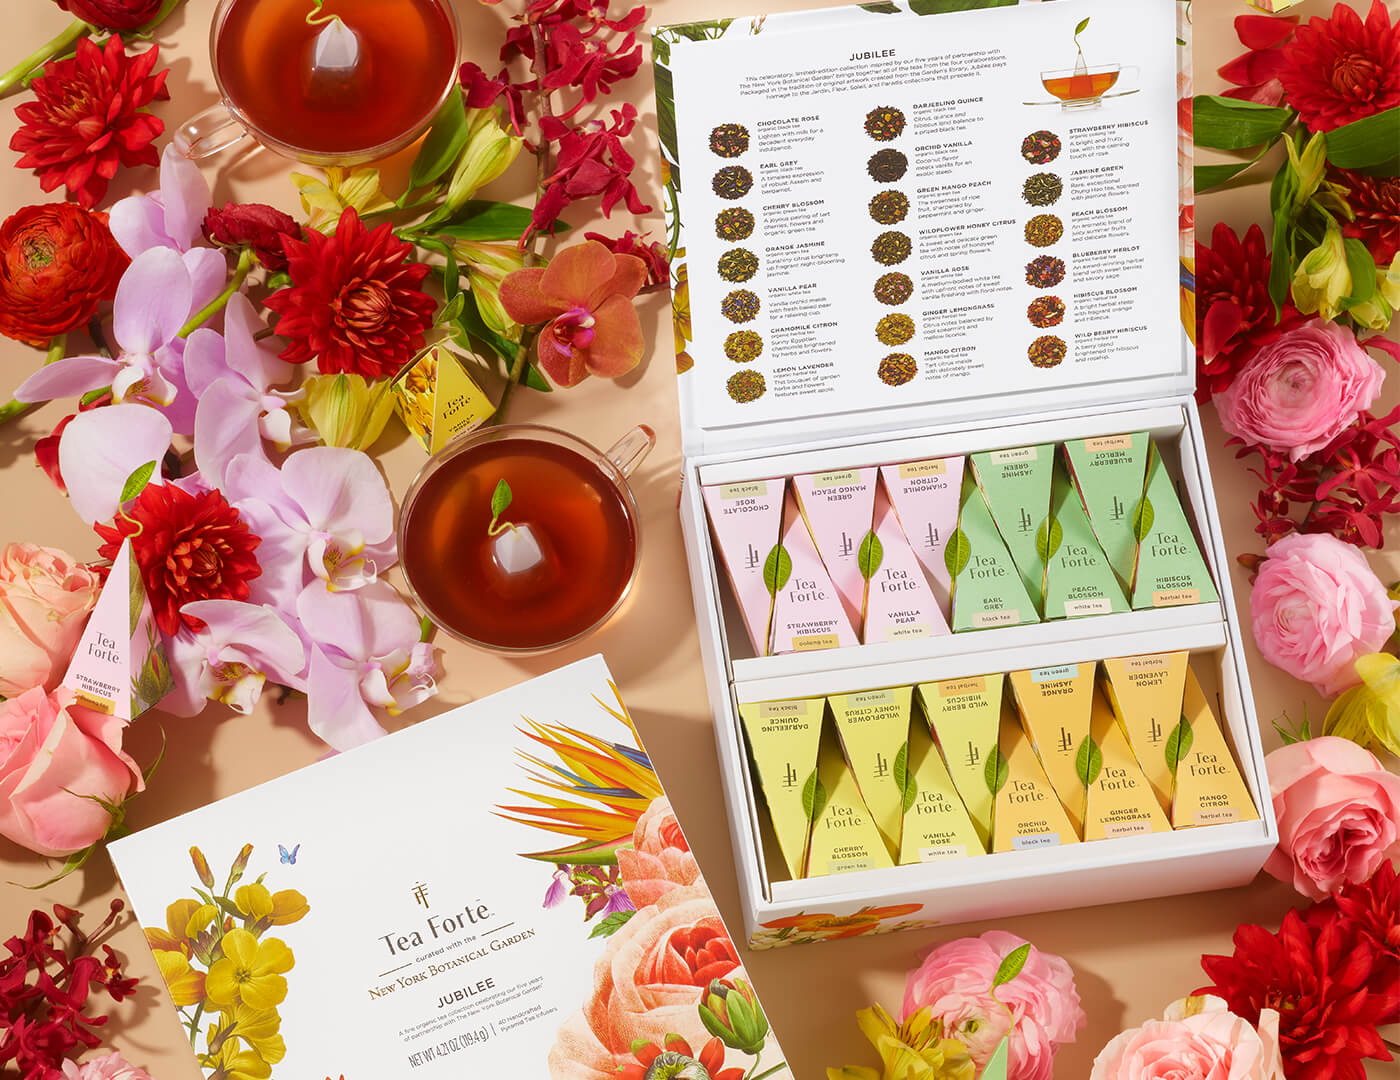 Jubilee Tea Chest of 40 pyramid tea infusers on table among flowers and teacups, open and closed boxes